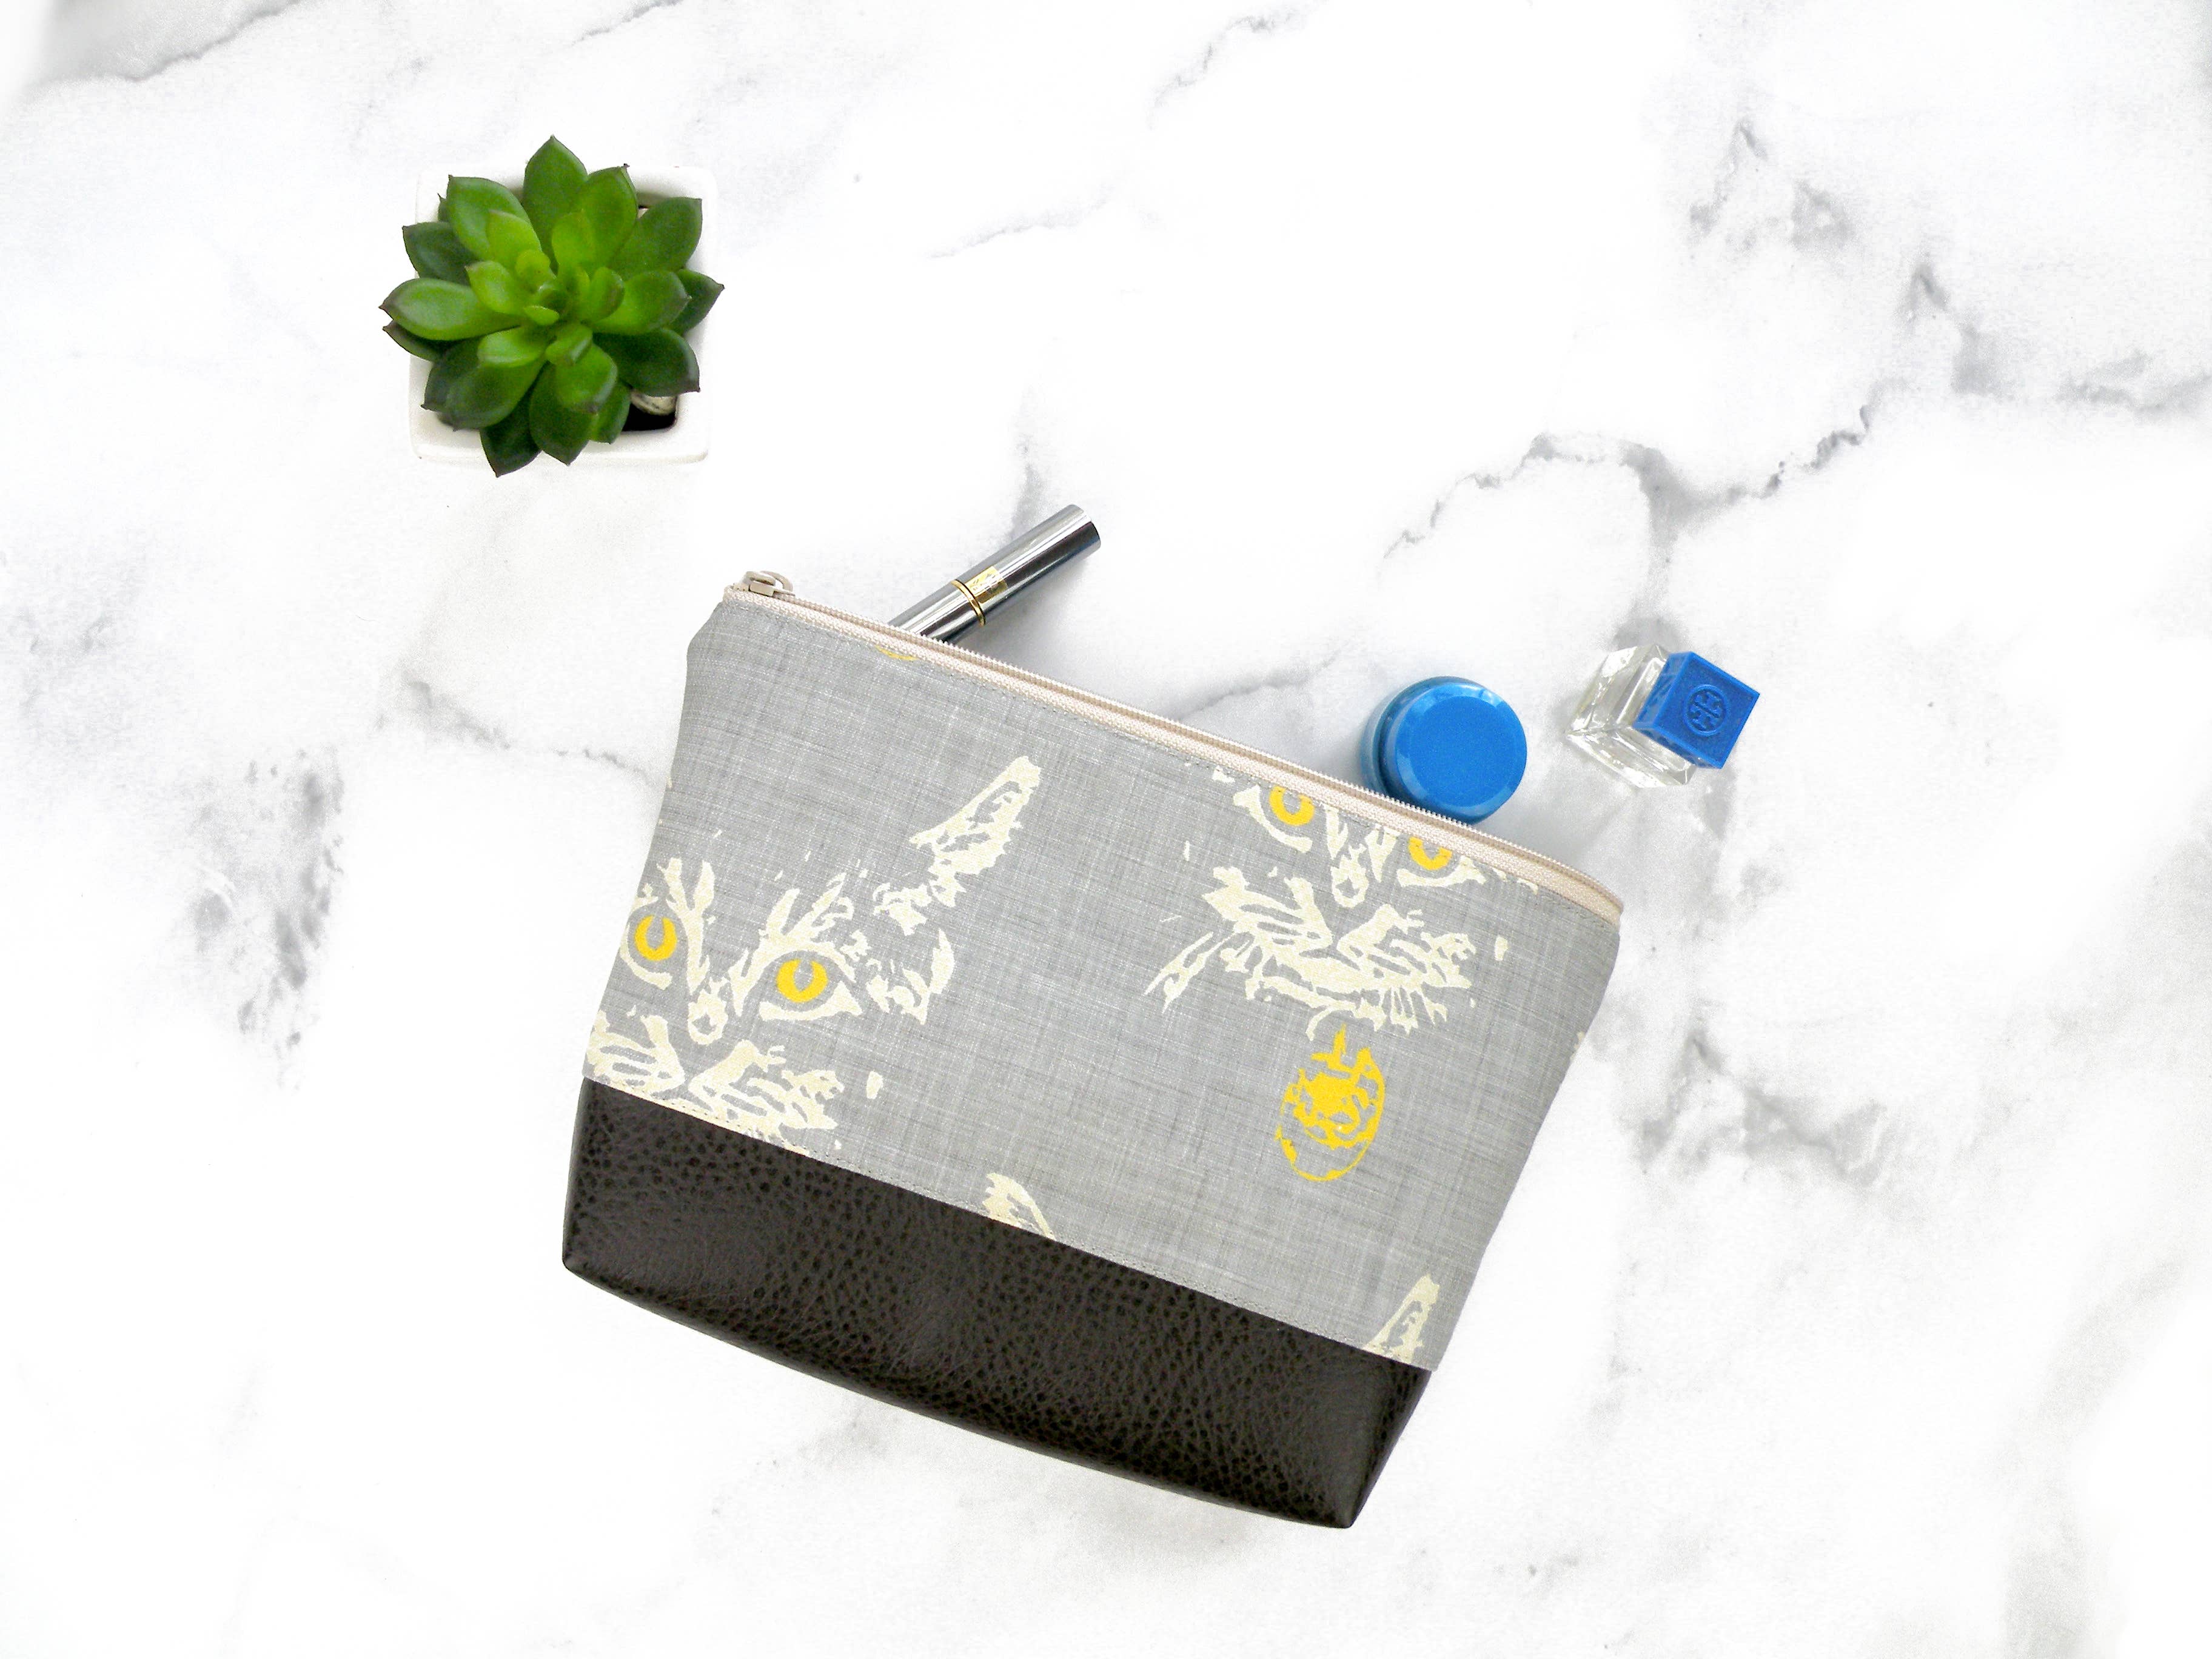 Large Cosmetic Clutch in Cat Print Linen